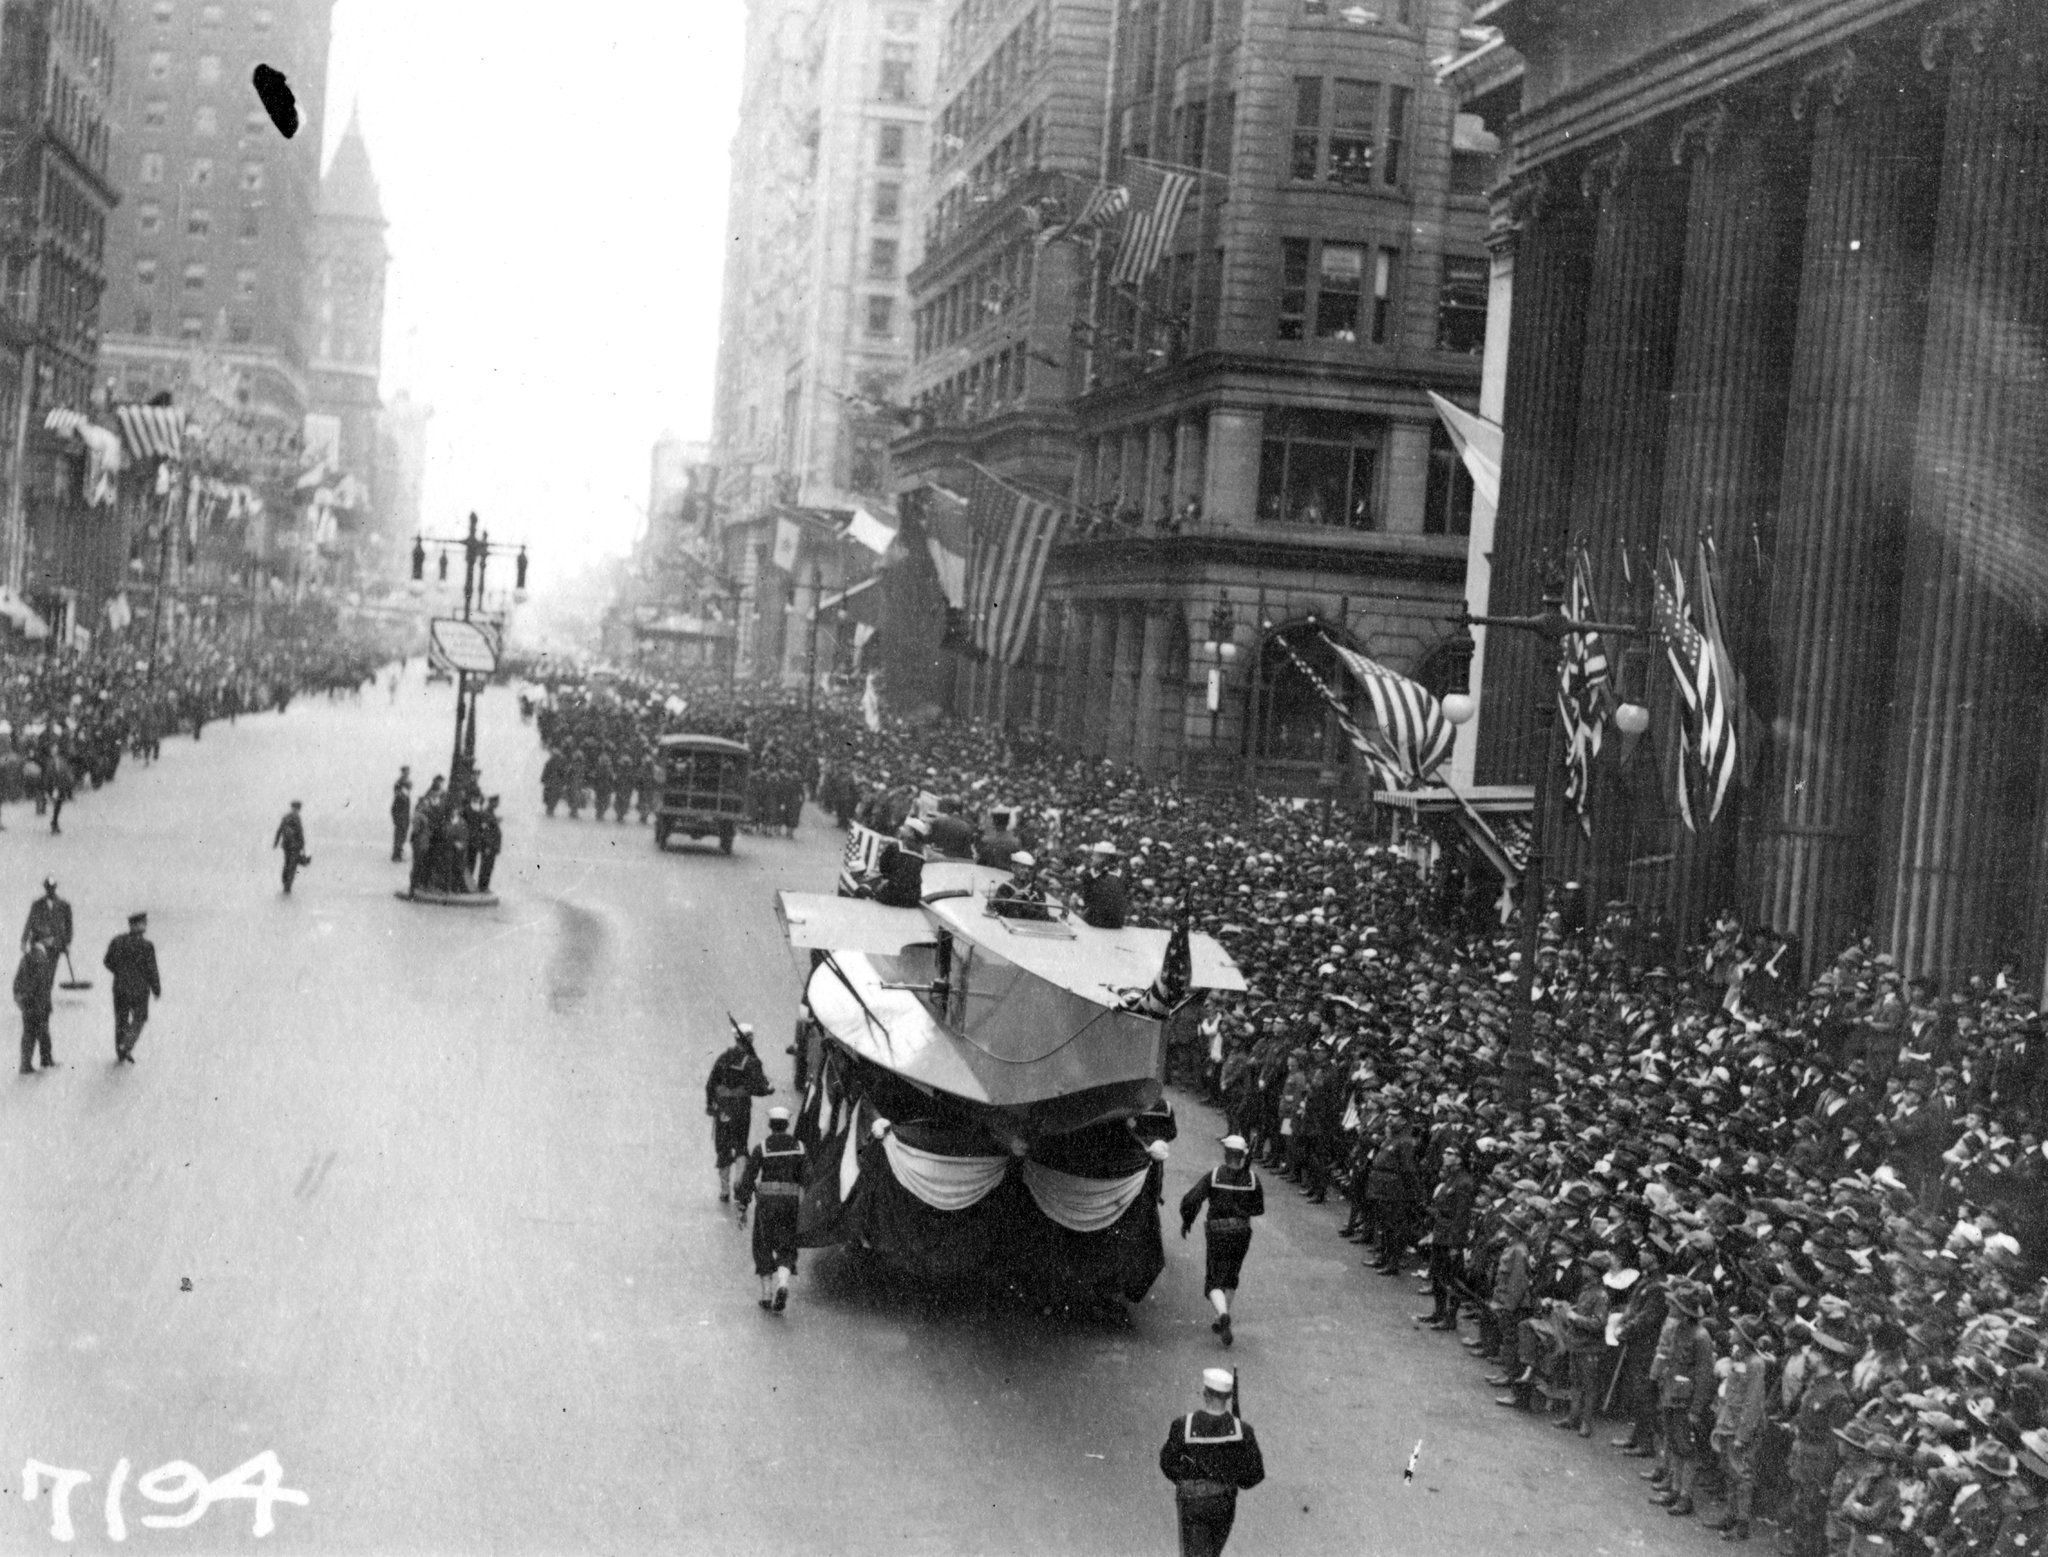 Philadelphia residents pack the streets for a wartime parade.